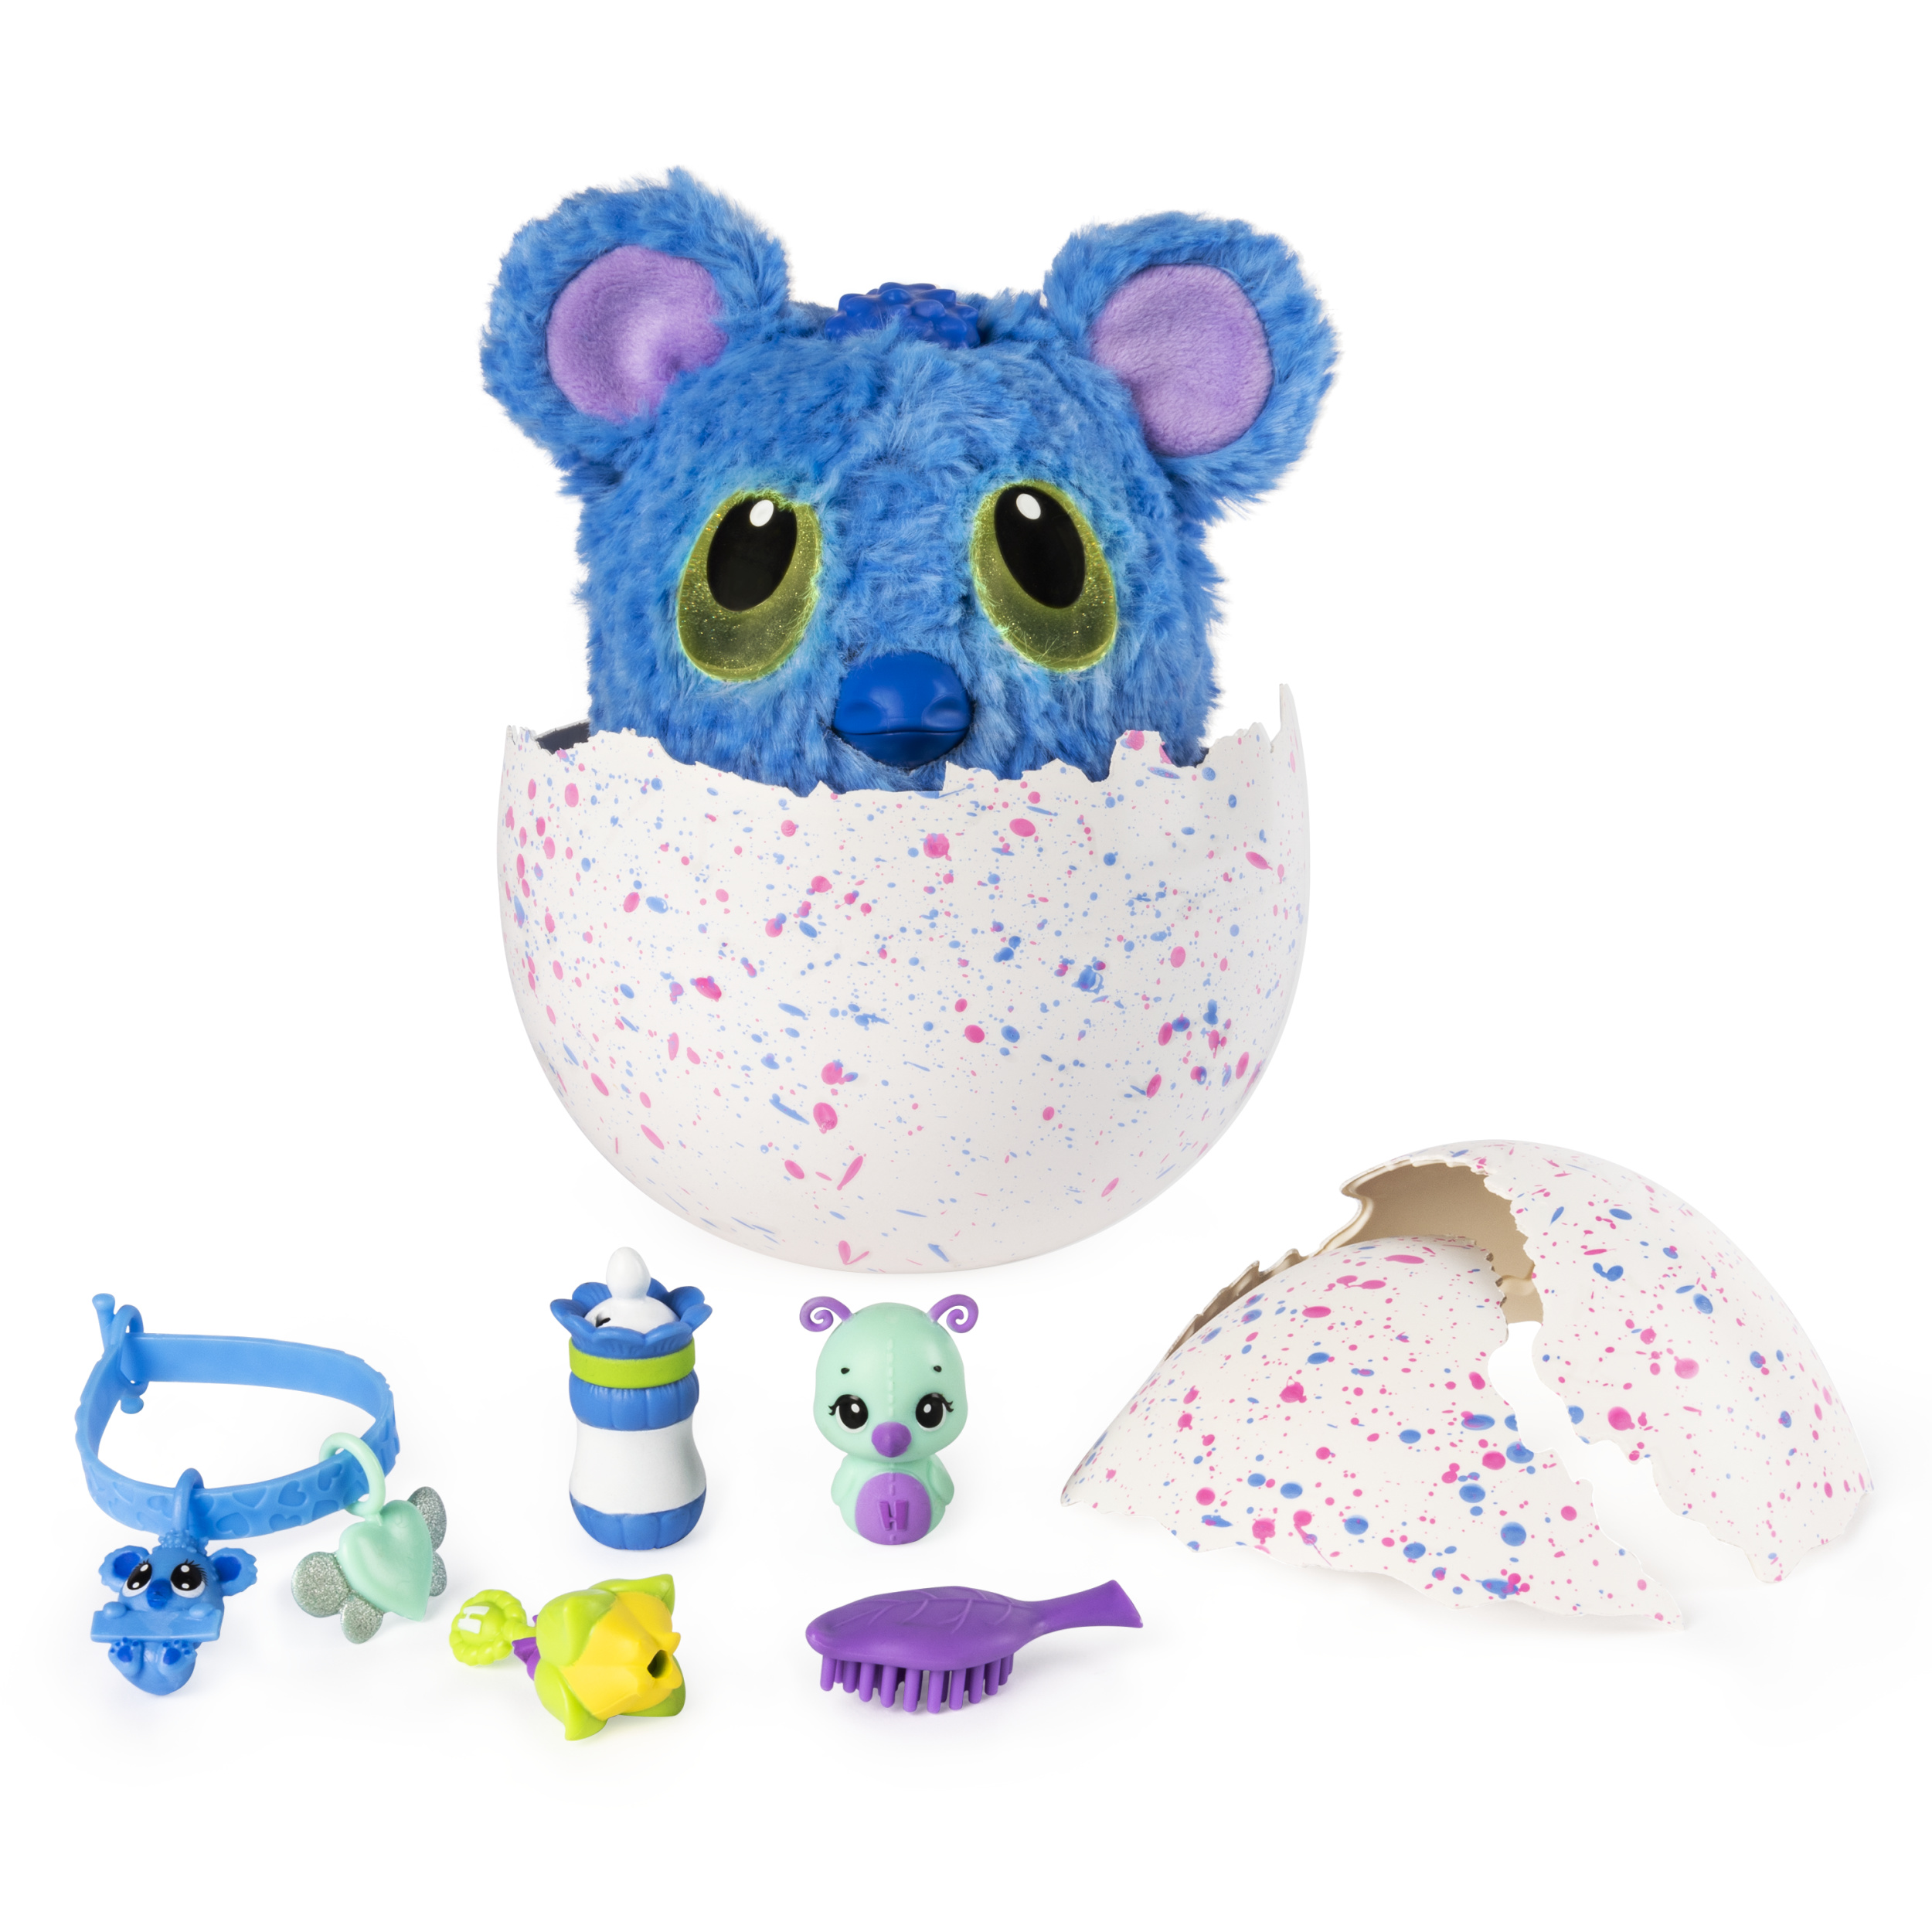 Hatchimals HatchiBabies Koalabee, Hatching Egg with Interactive Toy, Baby Koala Pet, Walmart Exclusive, for Ages 5 and Up - image 4 of 8